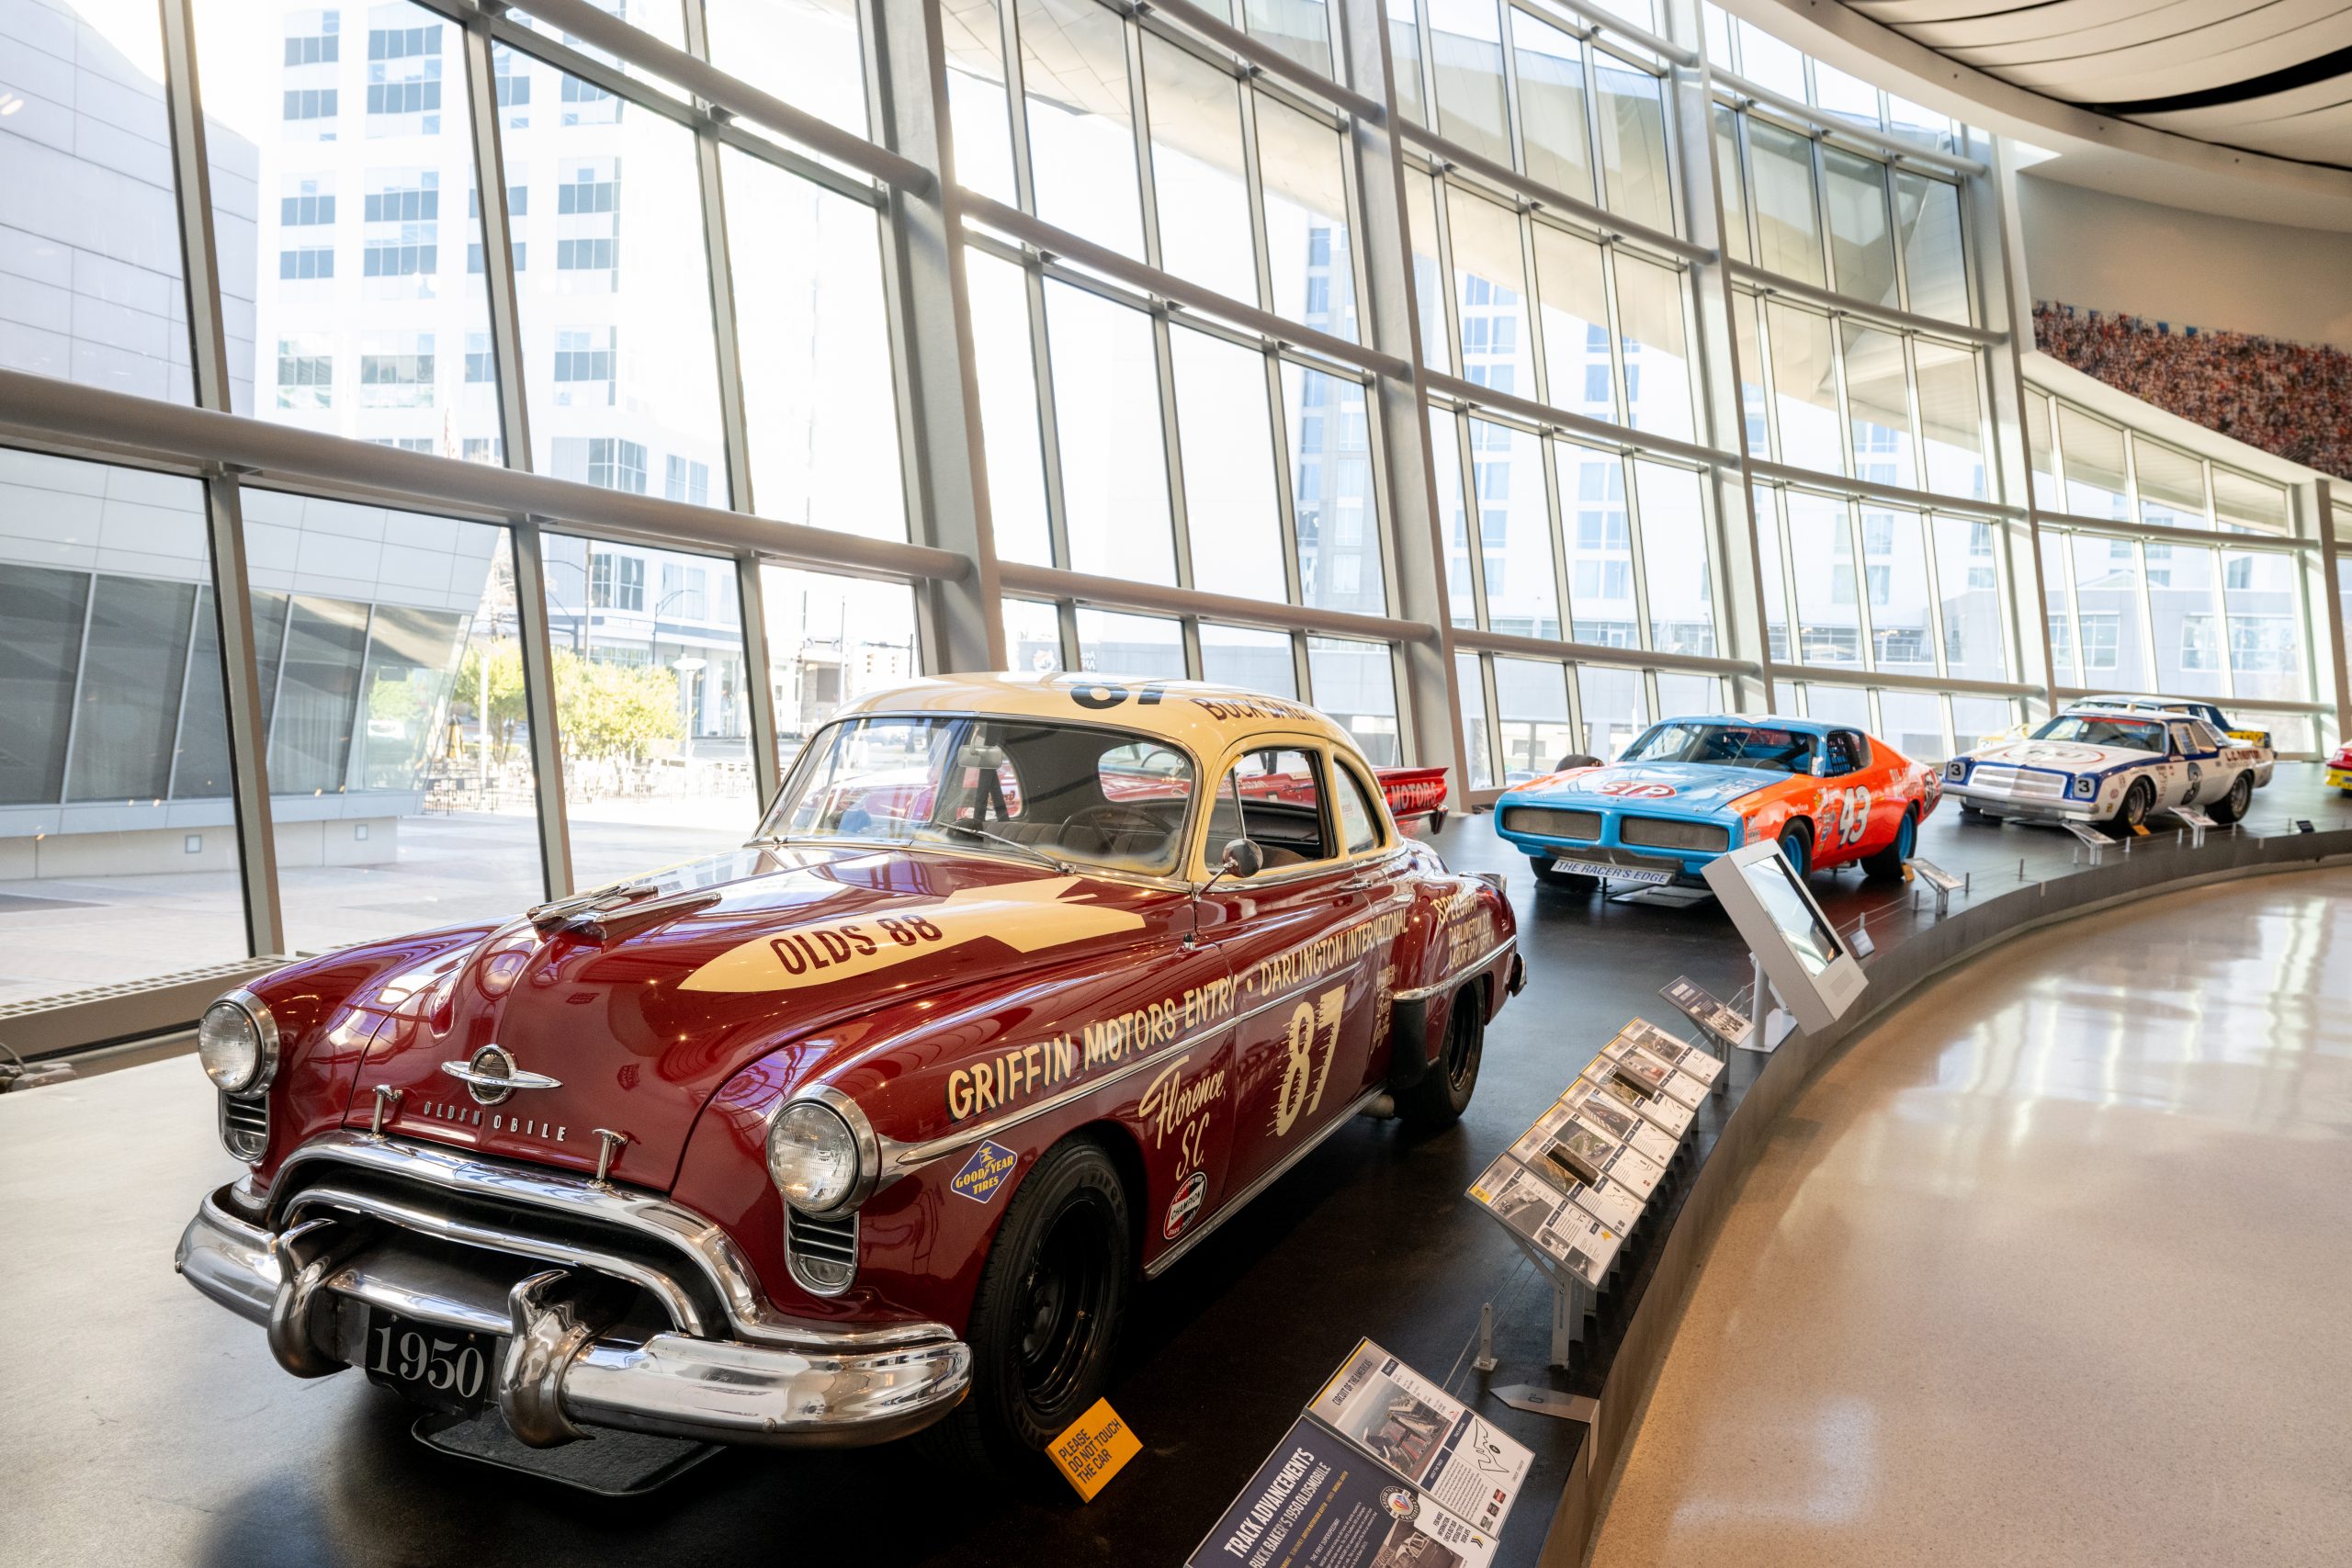 1950 Oldsmobile 88 – Driven by Hall of Famer Buck Baker (Class of 2013). This is a replica of the first entry in the first Southern 500 in 1950. Cody Hughes, Redefine U
Courtesy of Charlotte Regional Visitors Authority